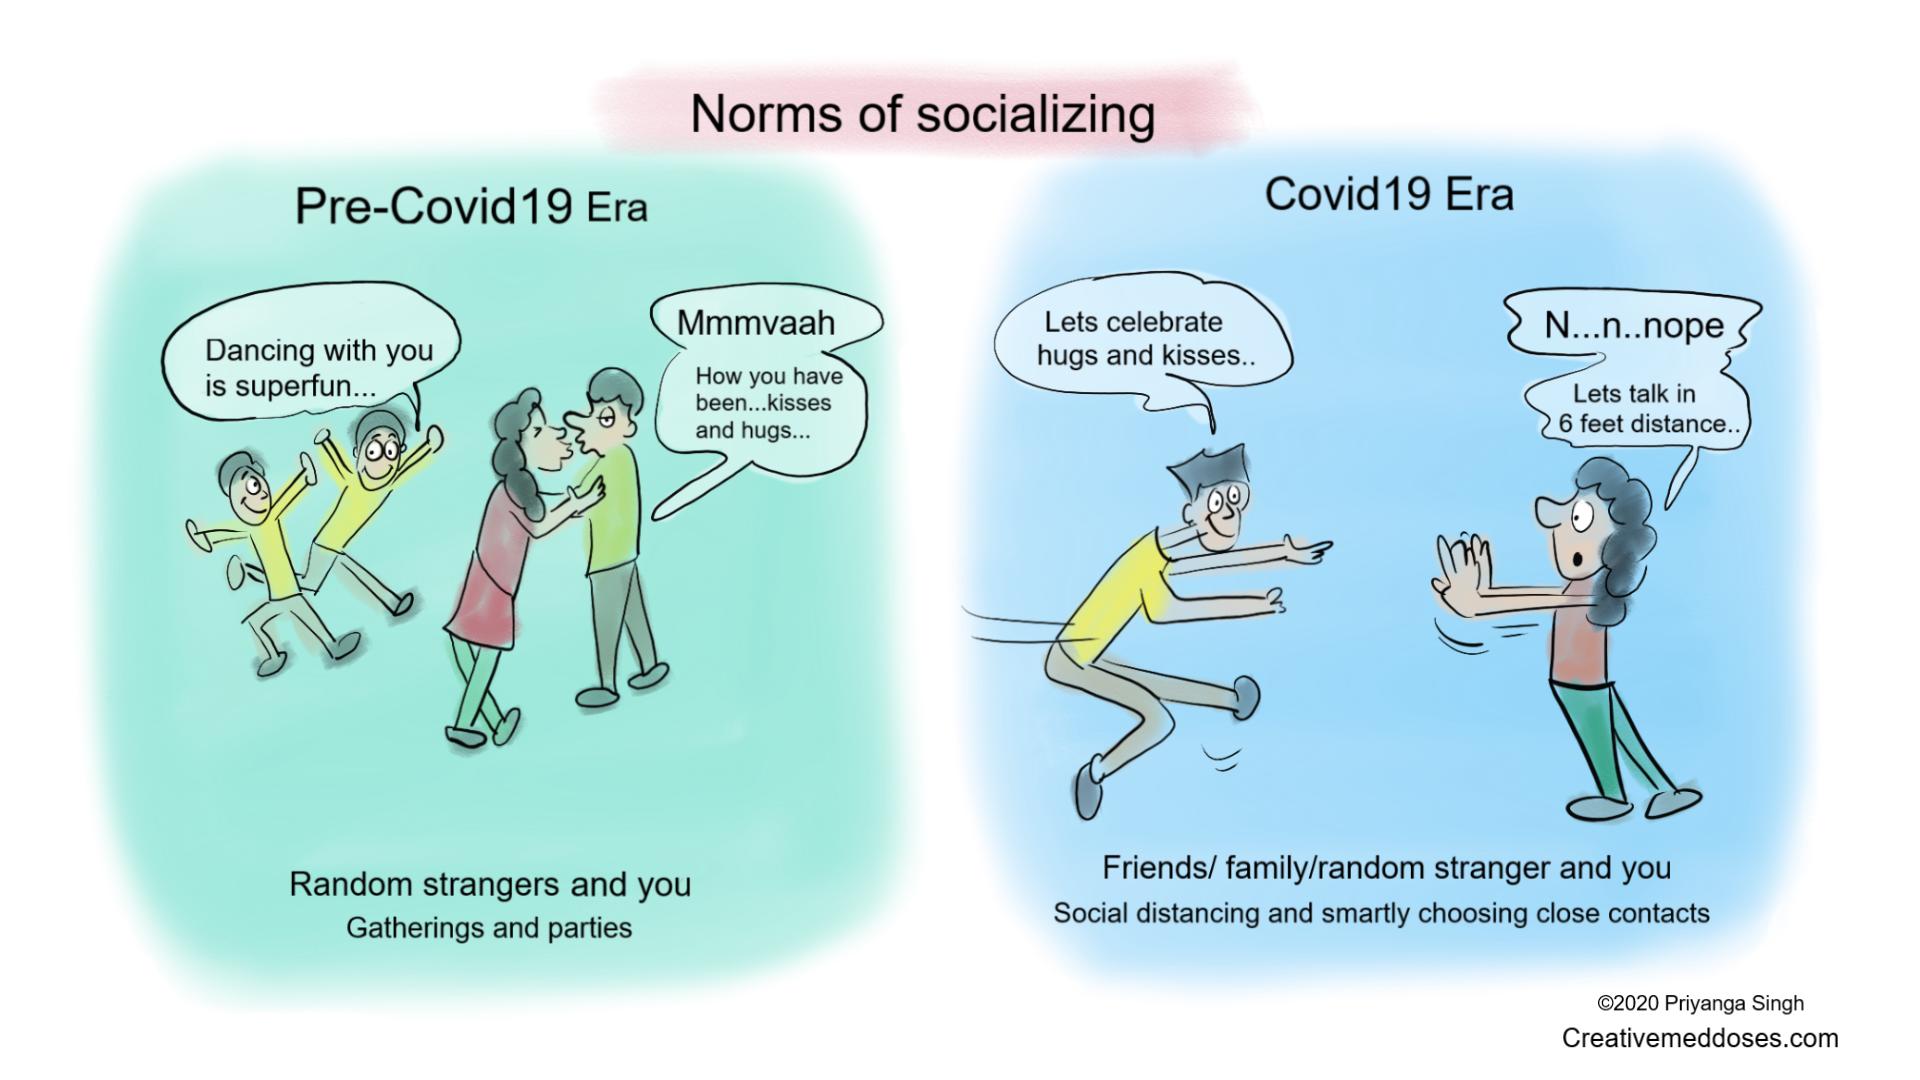 Covid19 and social distancing 